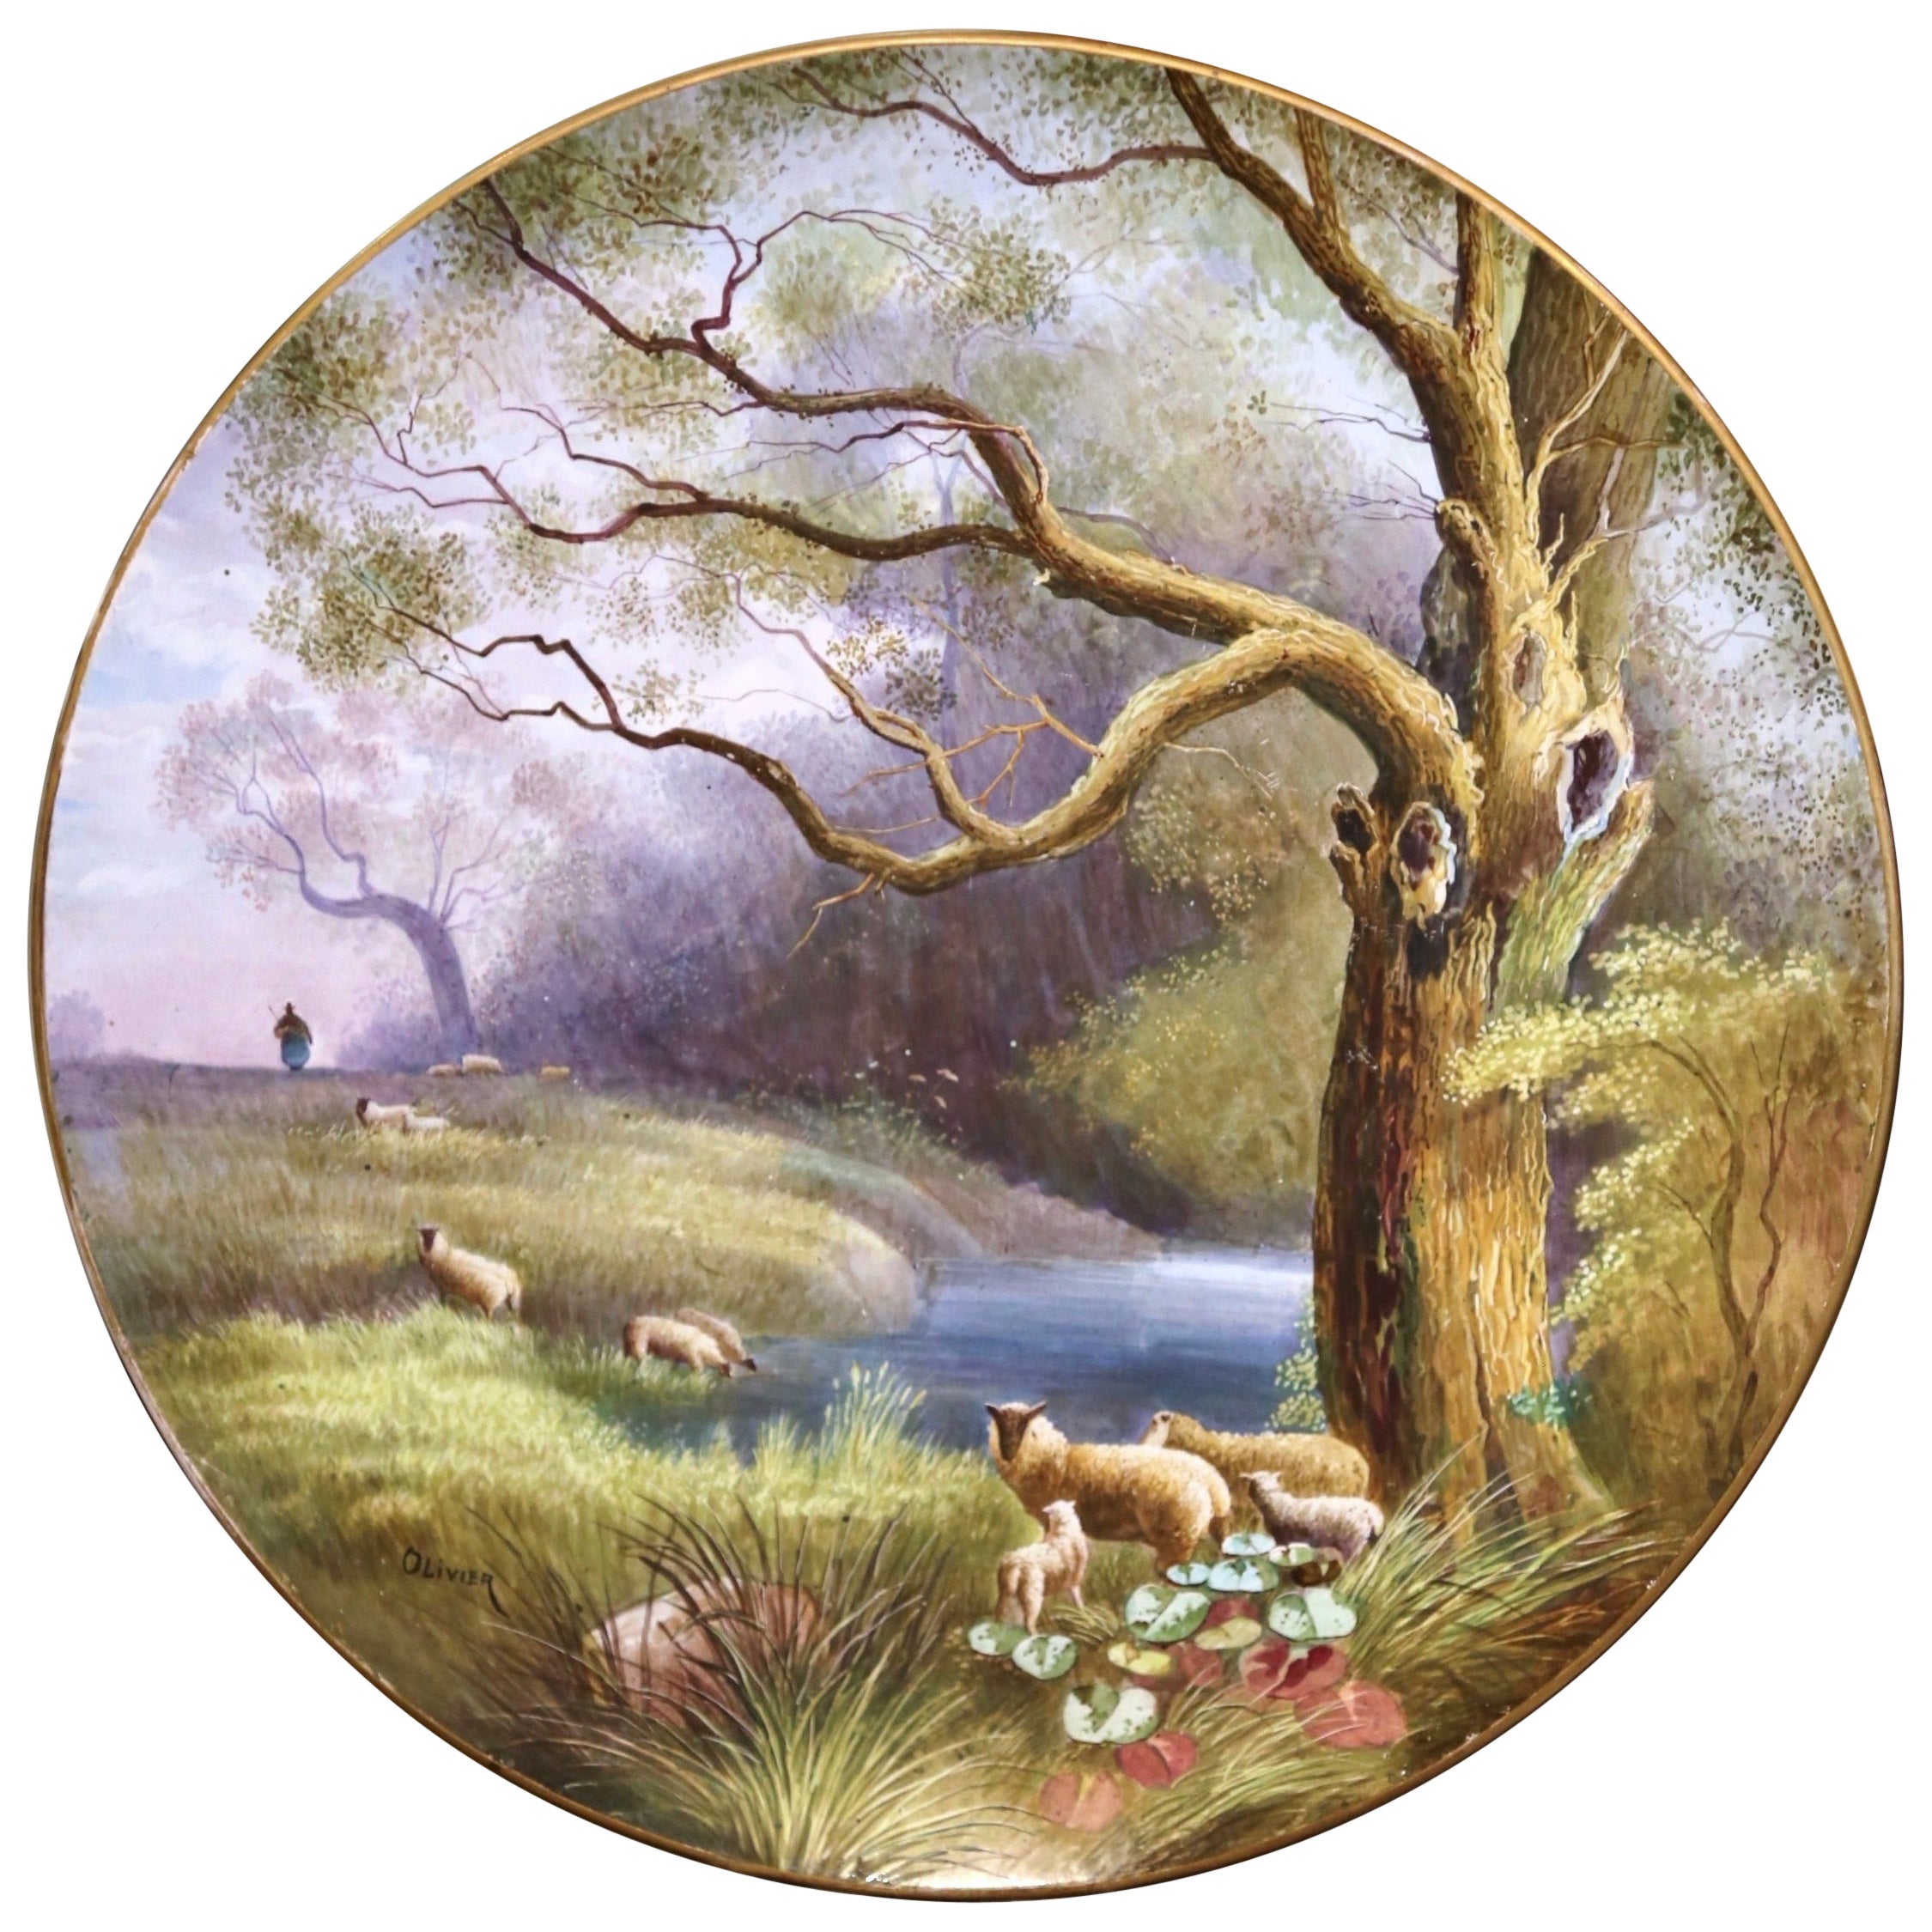  19th Century Hand Painted Porcelain Wall Platter with Sheep Signed Olivier For Sale